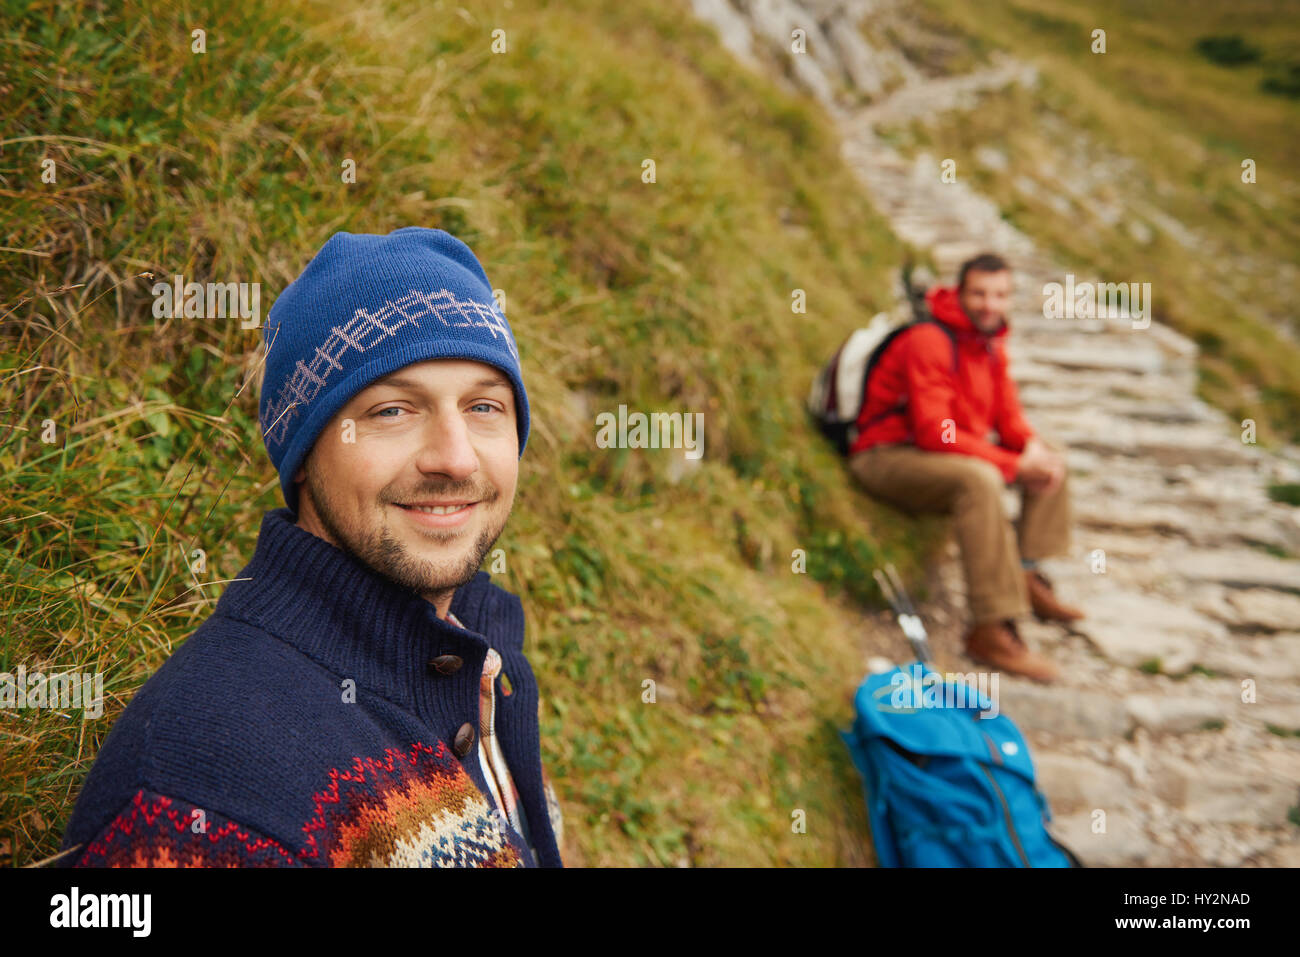 Smiling hikers resting on a rugged mountain trail Stock Photo